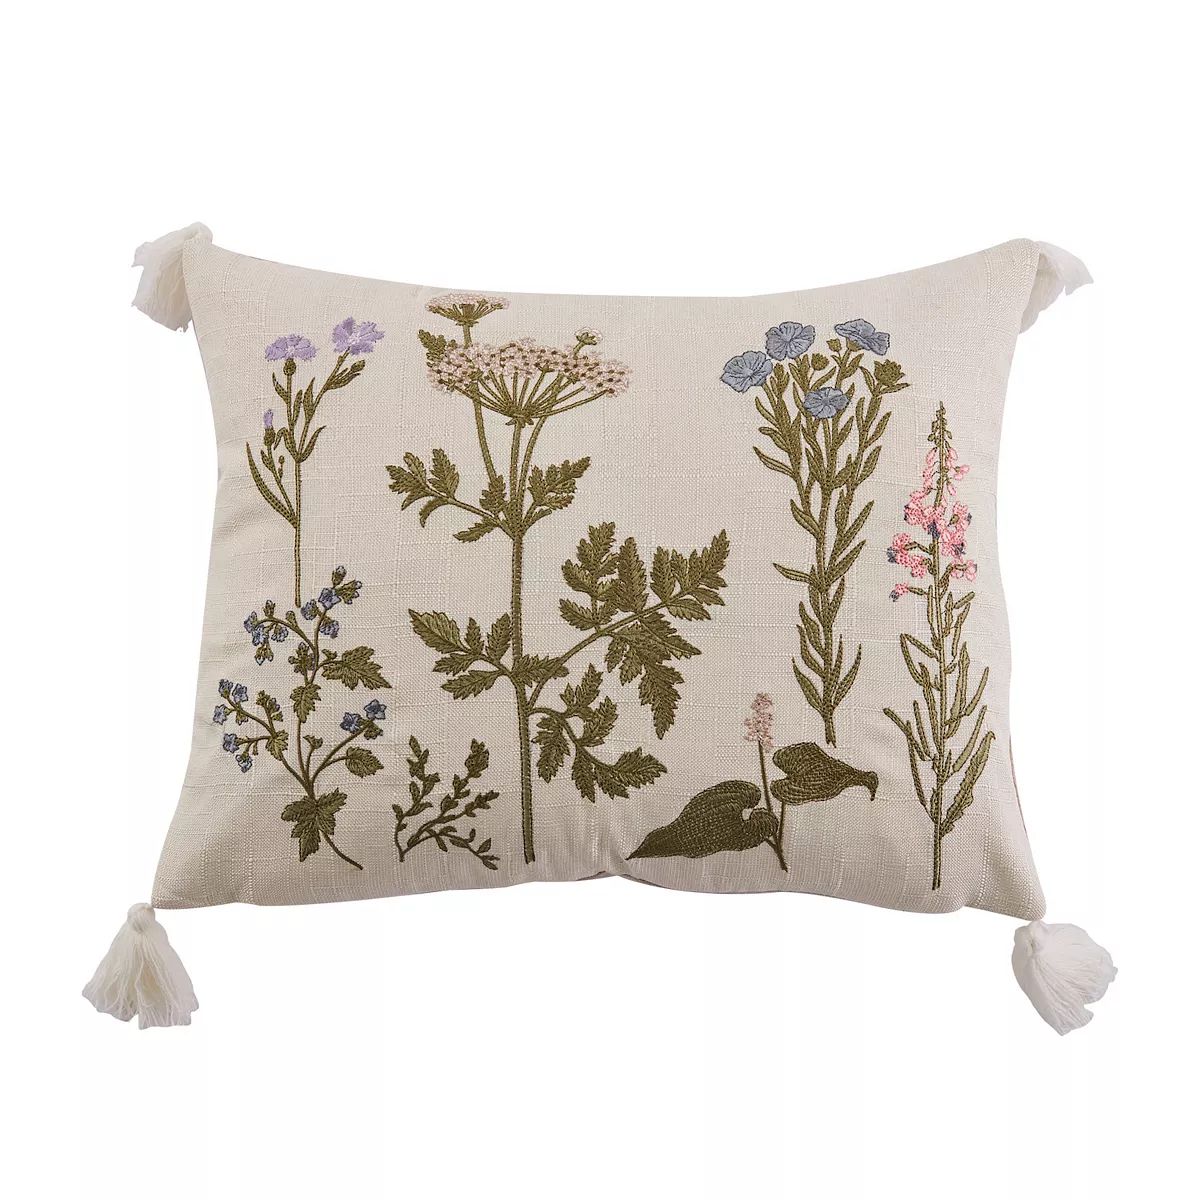 Levtex Home Apolonia Floral Embroidered Pillow | Kohl's